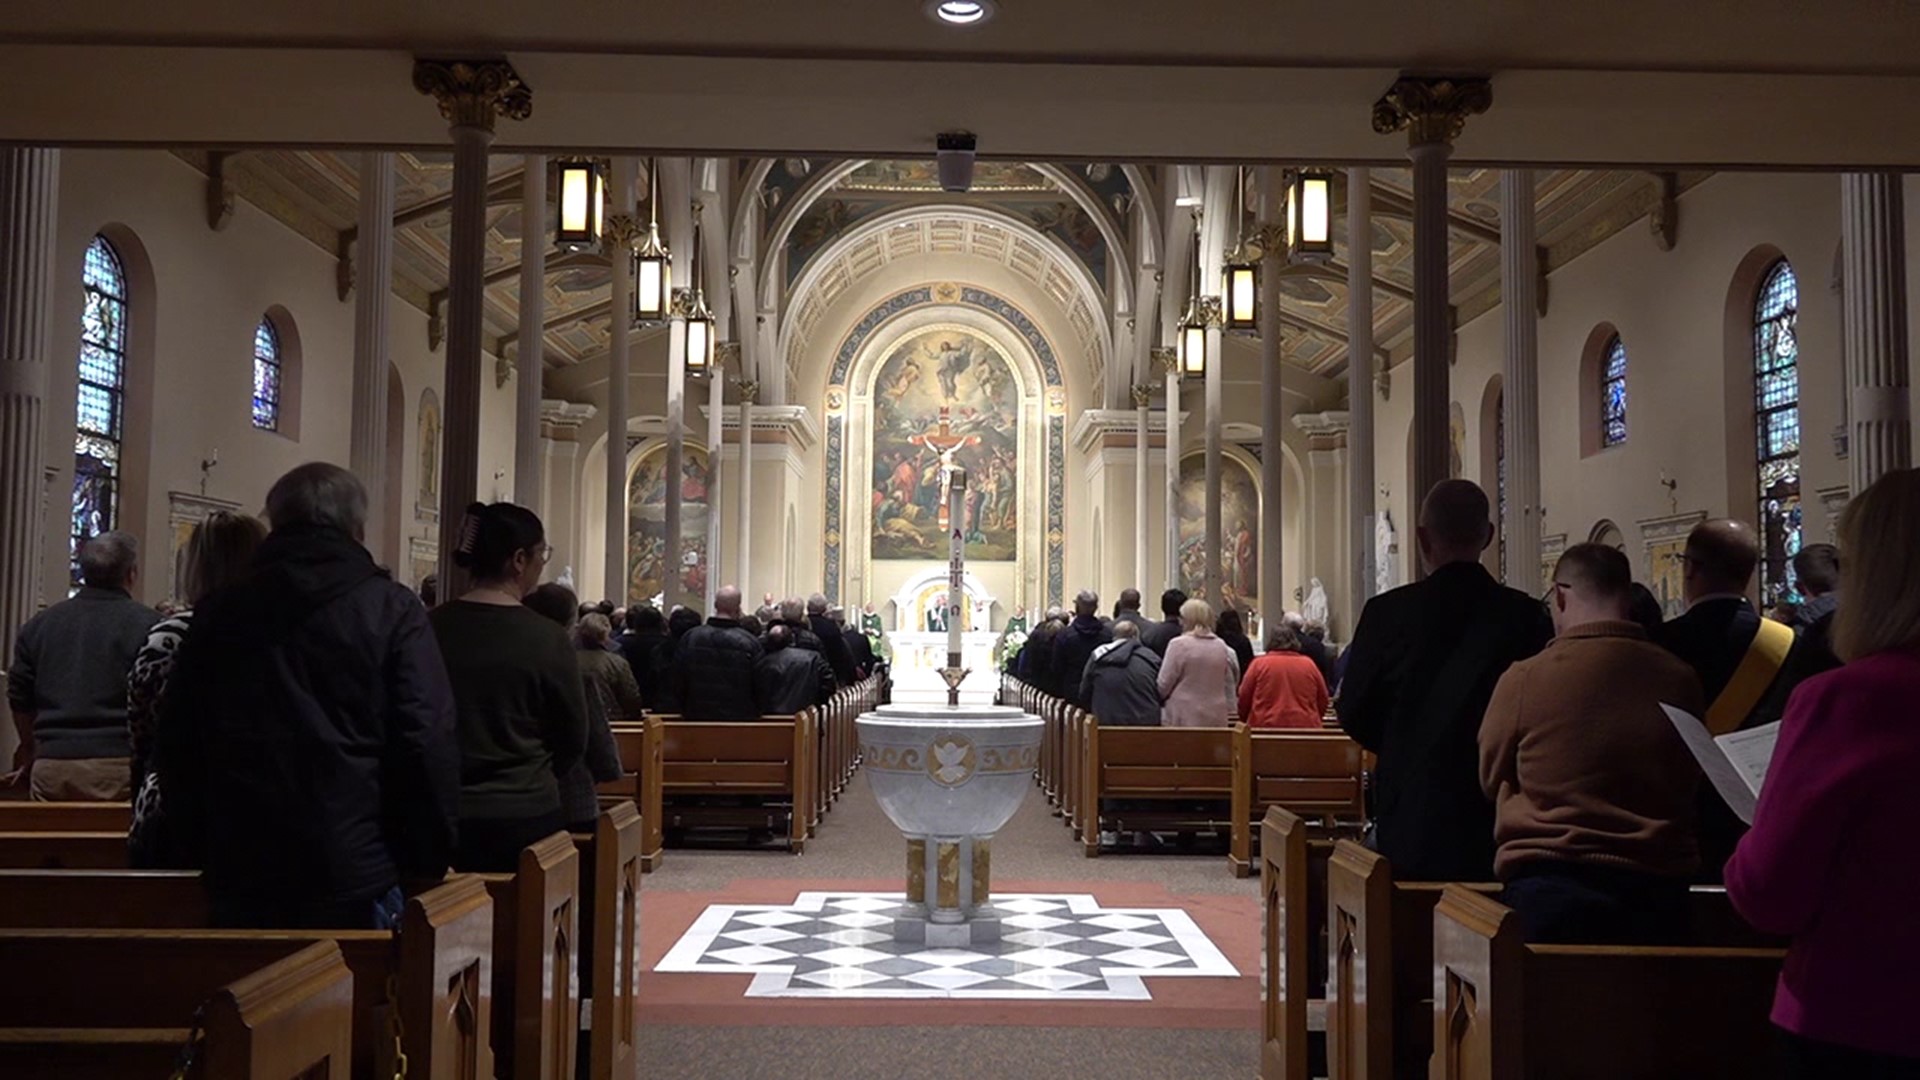 St. Peter's Cathedral held its annual special abilities mass for people with disabilities leading up to developmental disabilities awareness month.